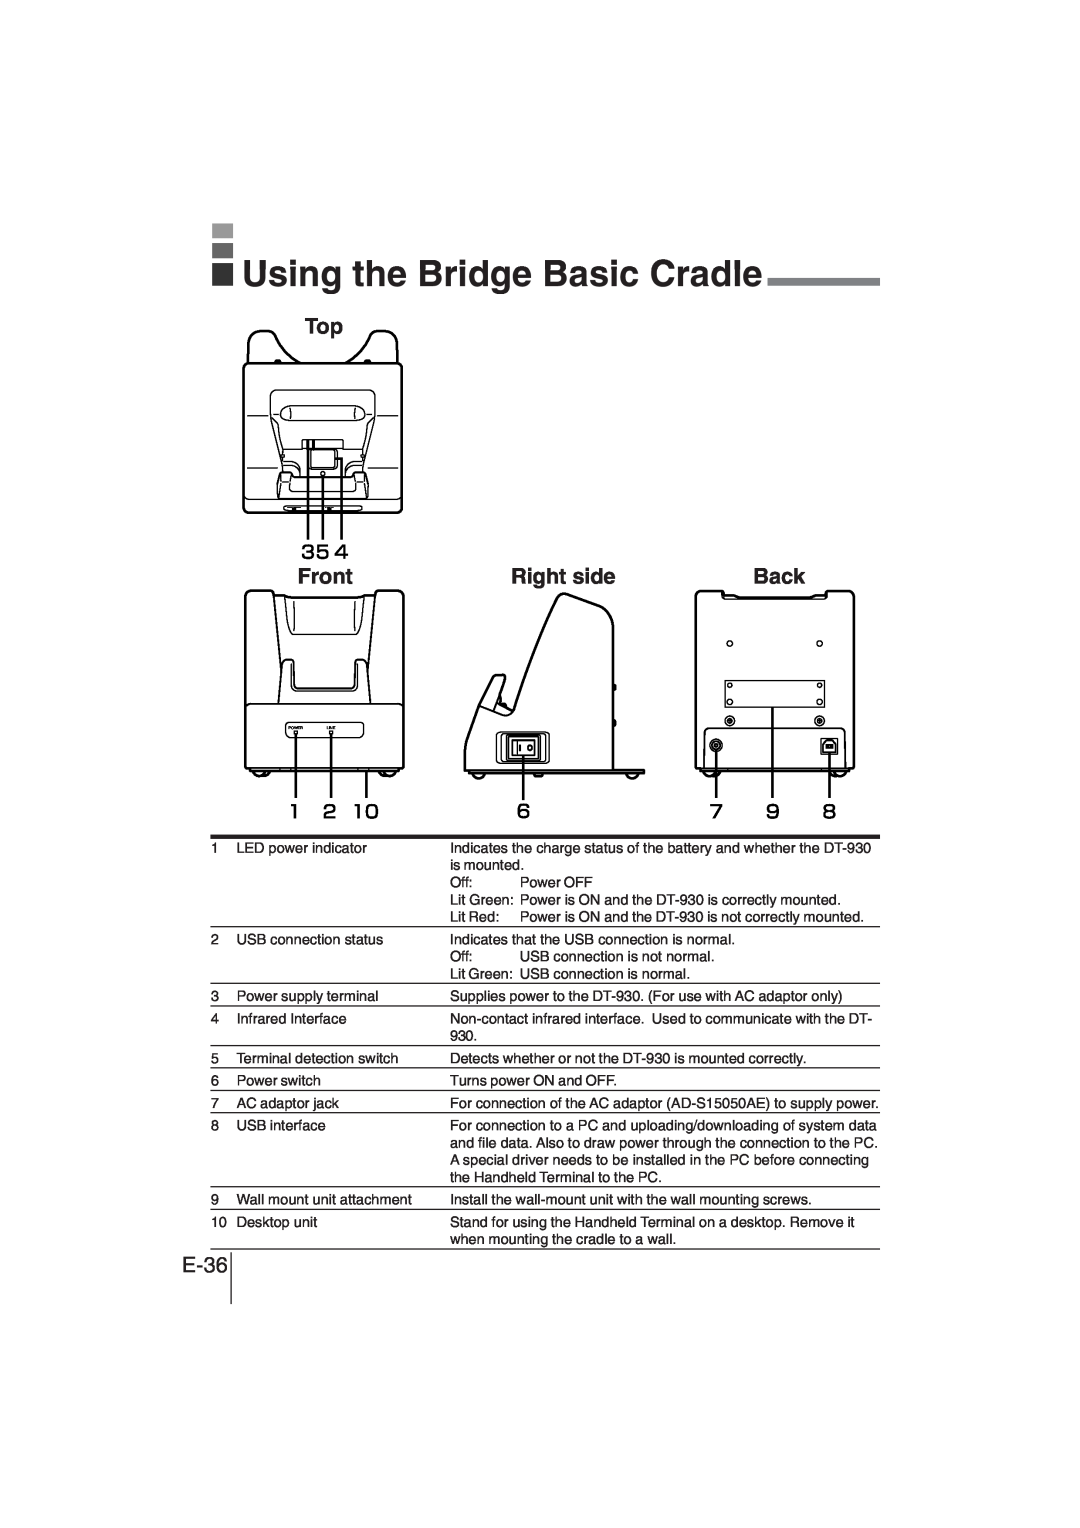 Casio DT-930 manual Using the Bridge Basic Cradle, E-36, Front, Right side 